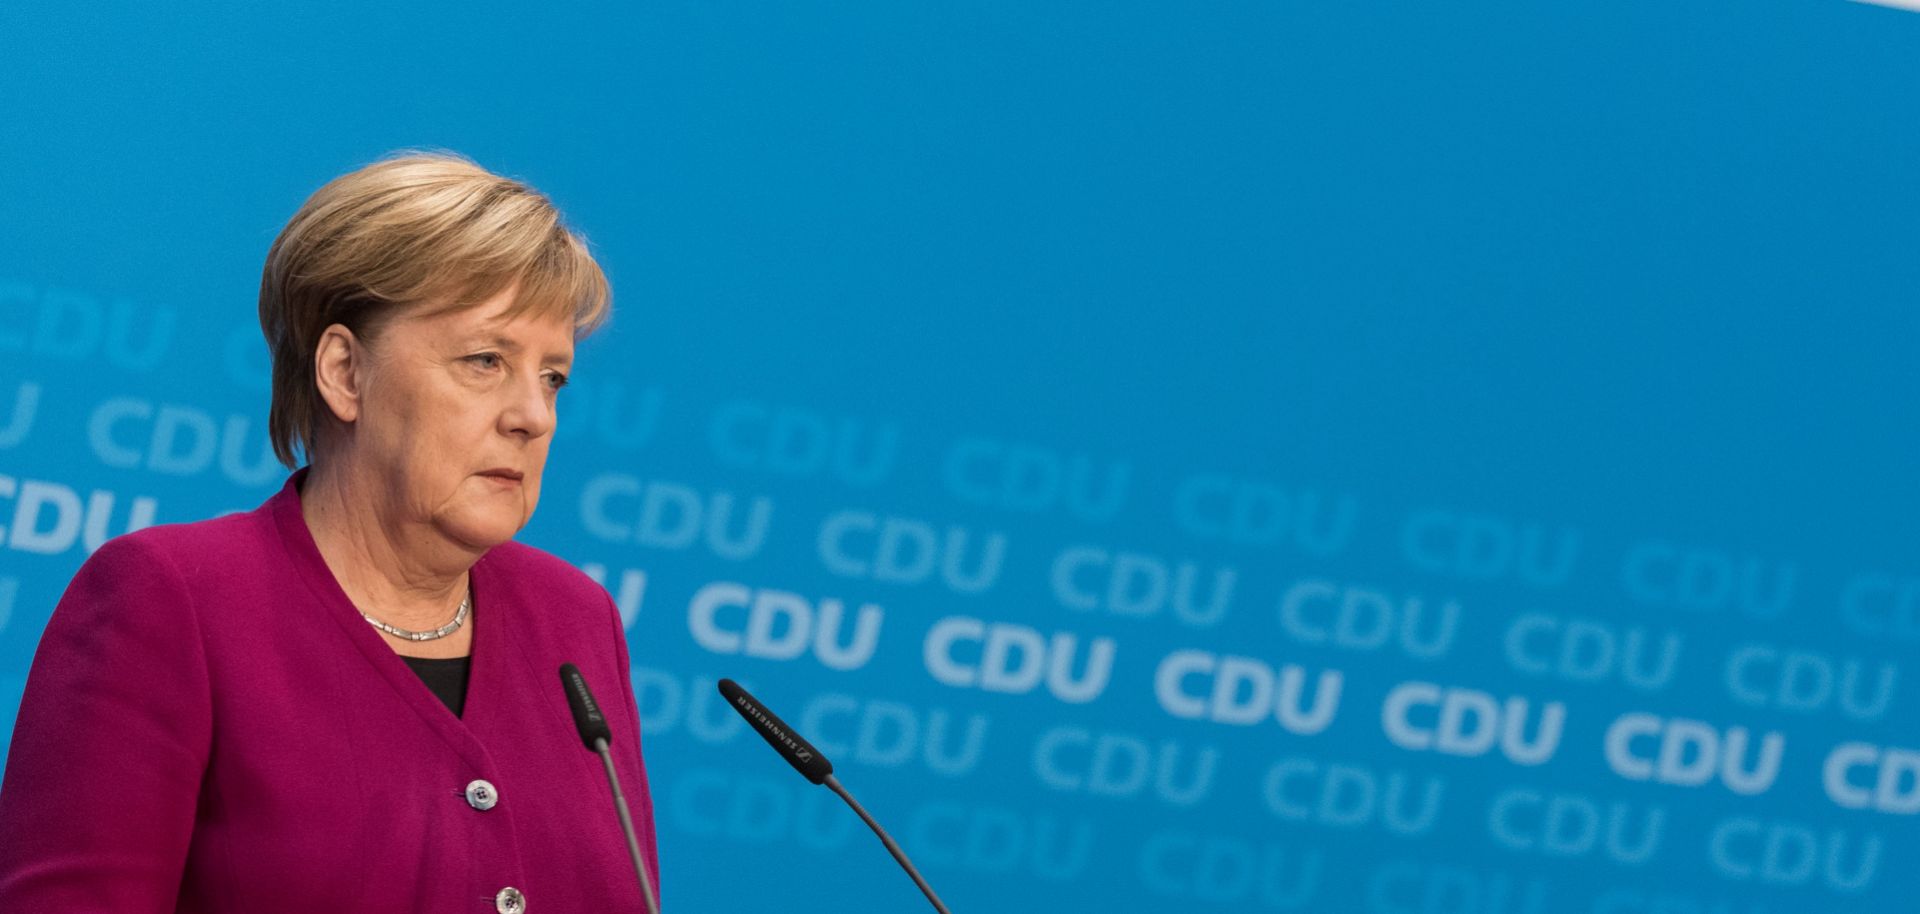 German Chancellor Angela Merkel speaks during an Oct. 29 news conference at the Christian Democratic Union party headquarters in Berlin.